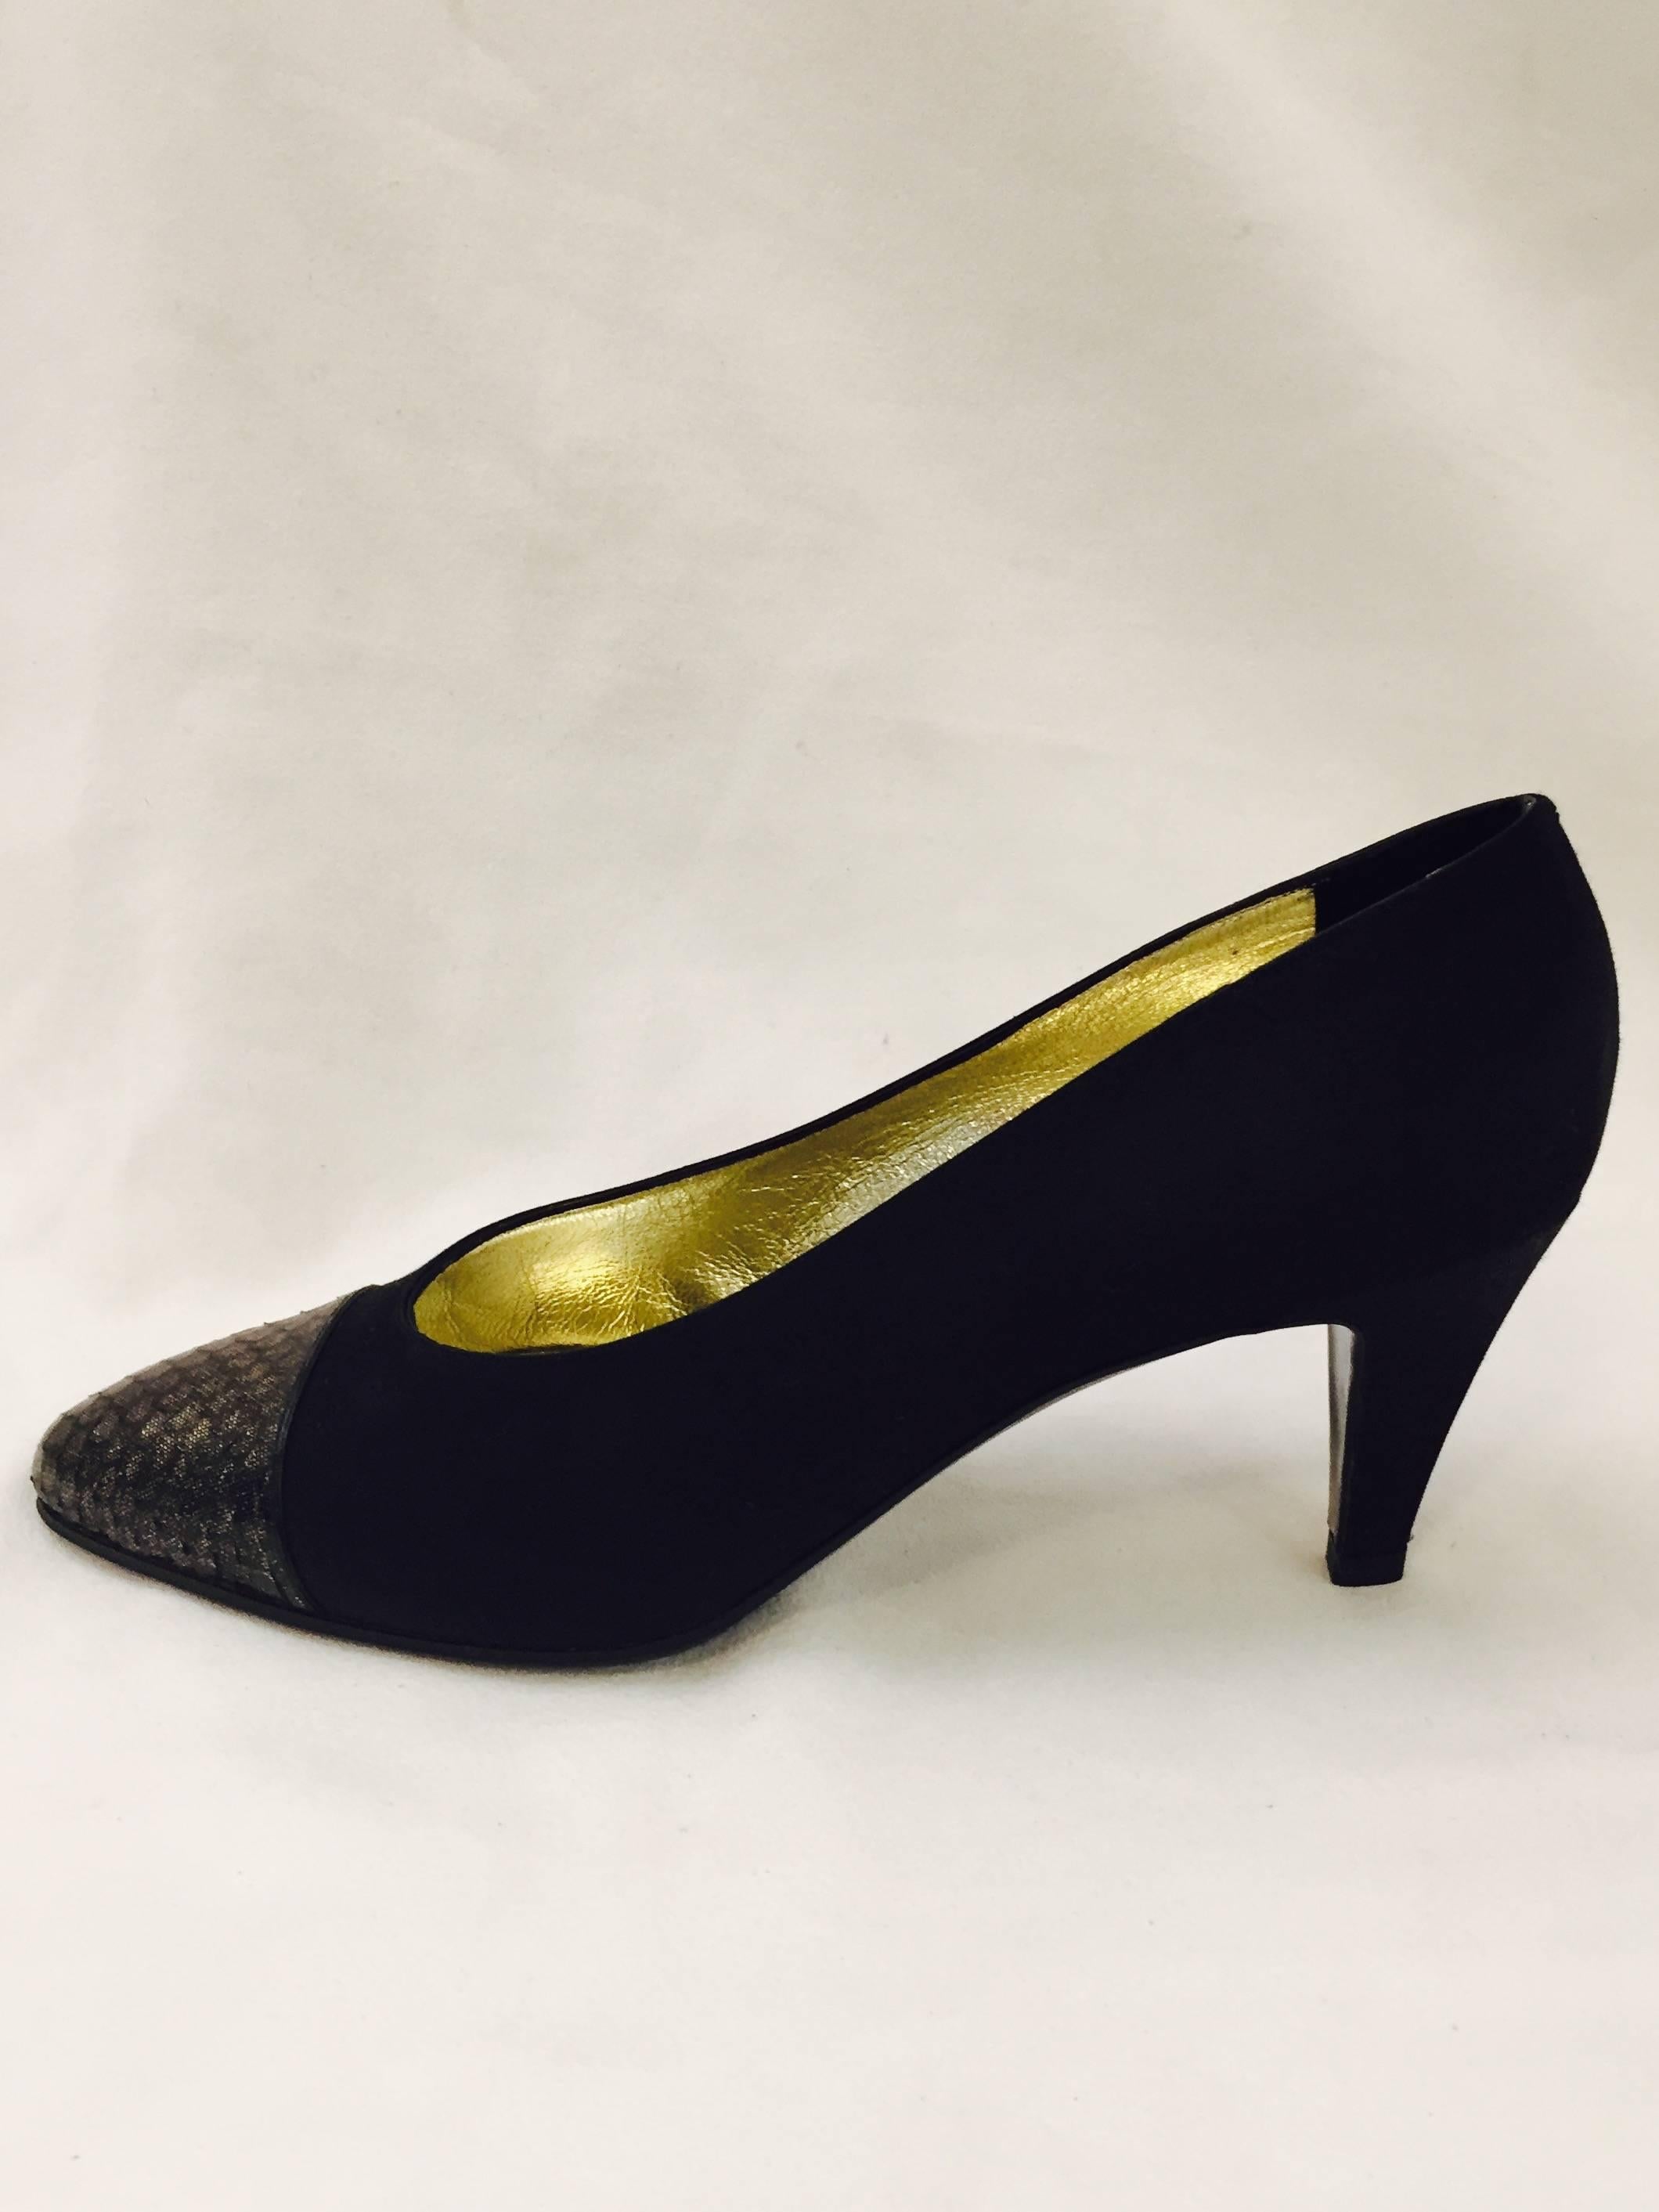 These Chanel satin pumps are made for dancing!  Embellished in gold and black on cap toes, these are lined in gold tone leather.   The heel is 2.5